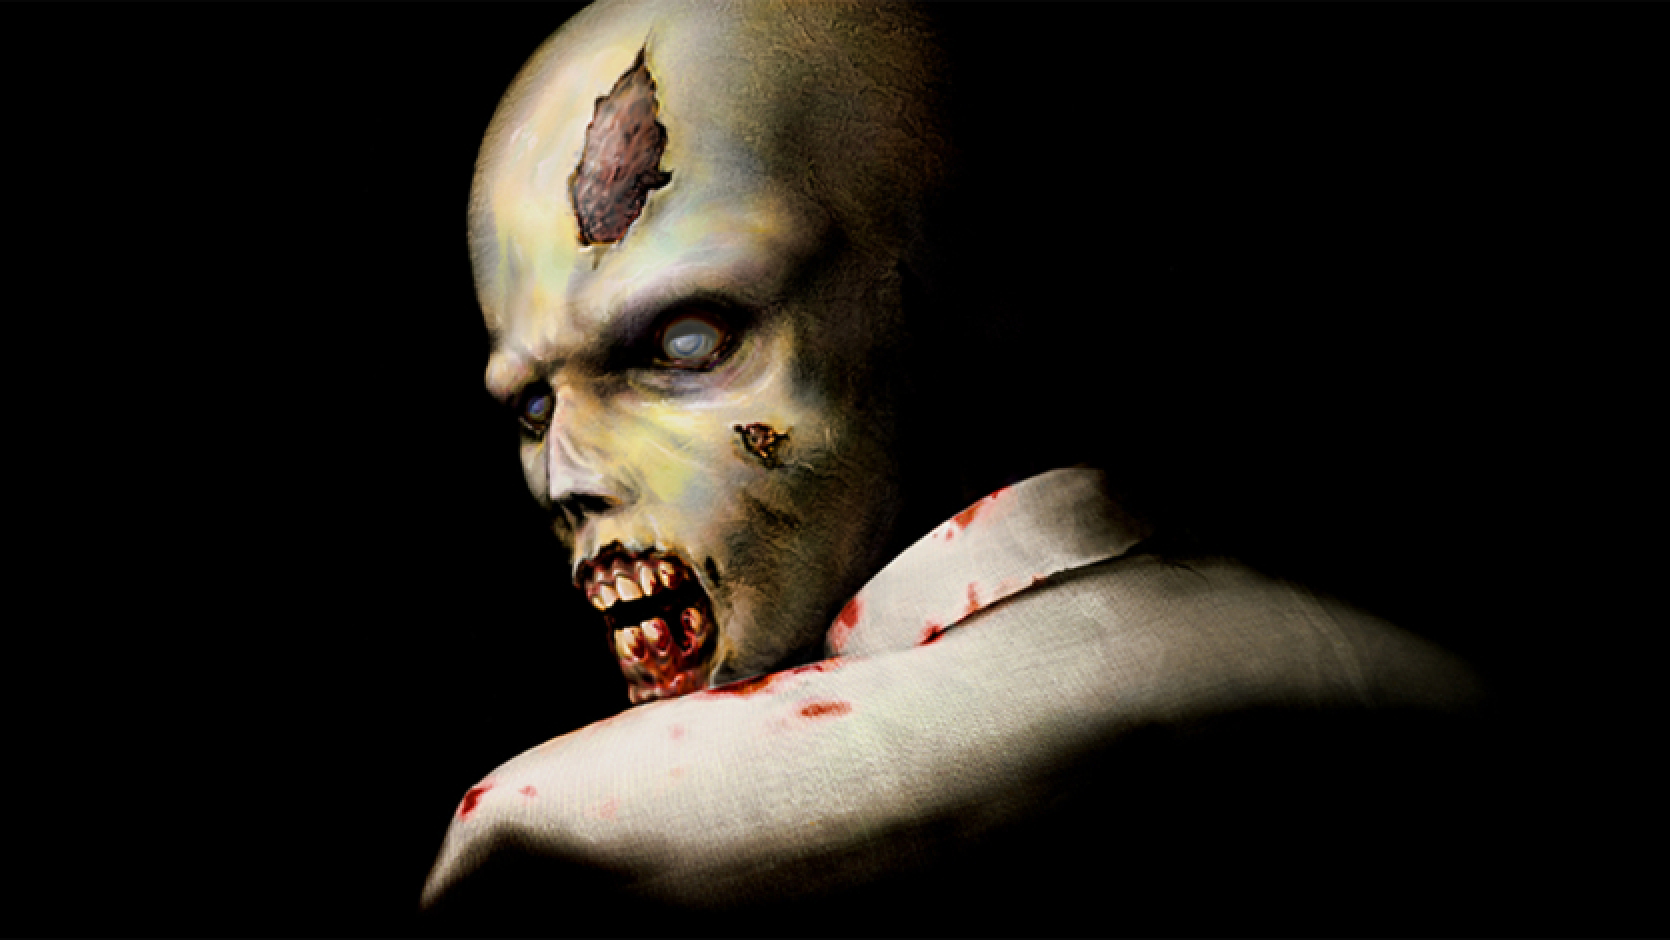 The original Resident Evil game has been released on PC on GOG along with re-releases of Resident Evil 2 and Resident Evil 3: Nemesis